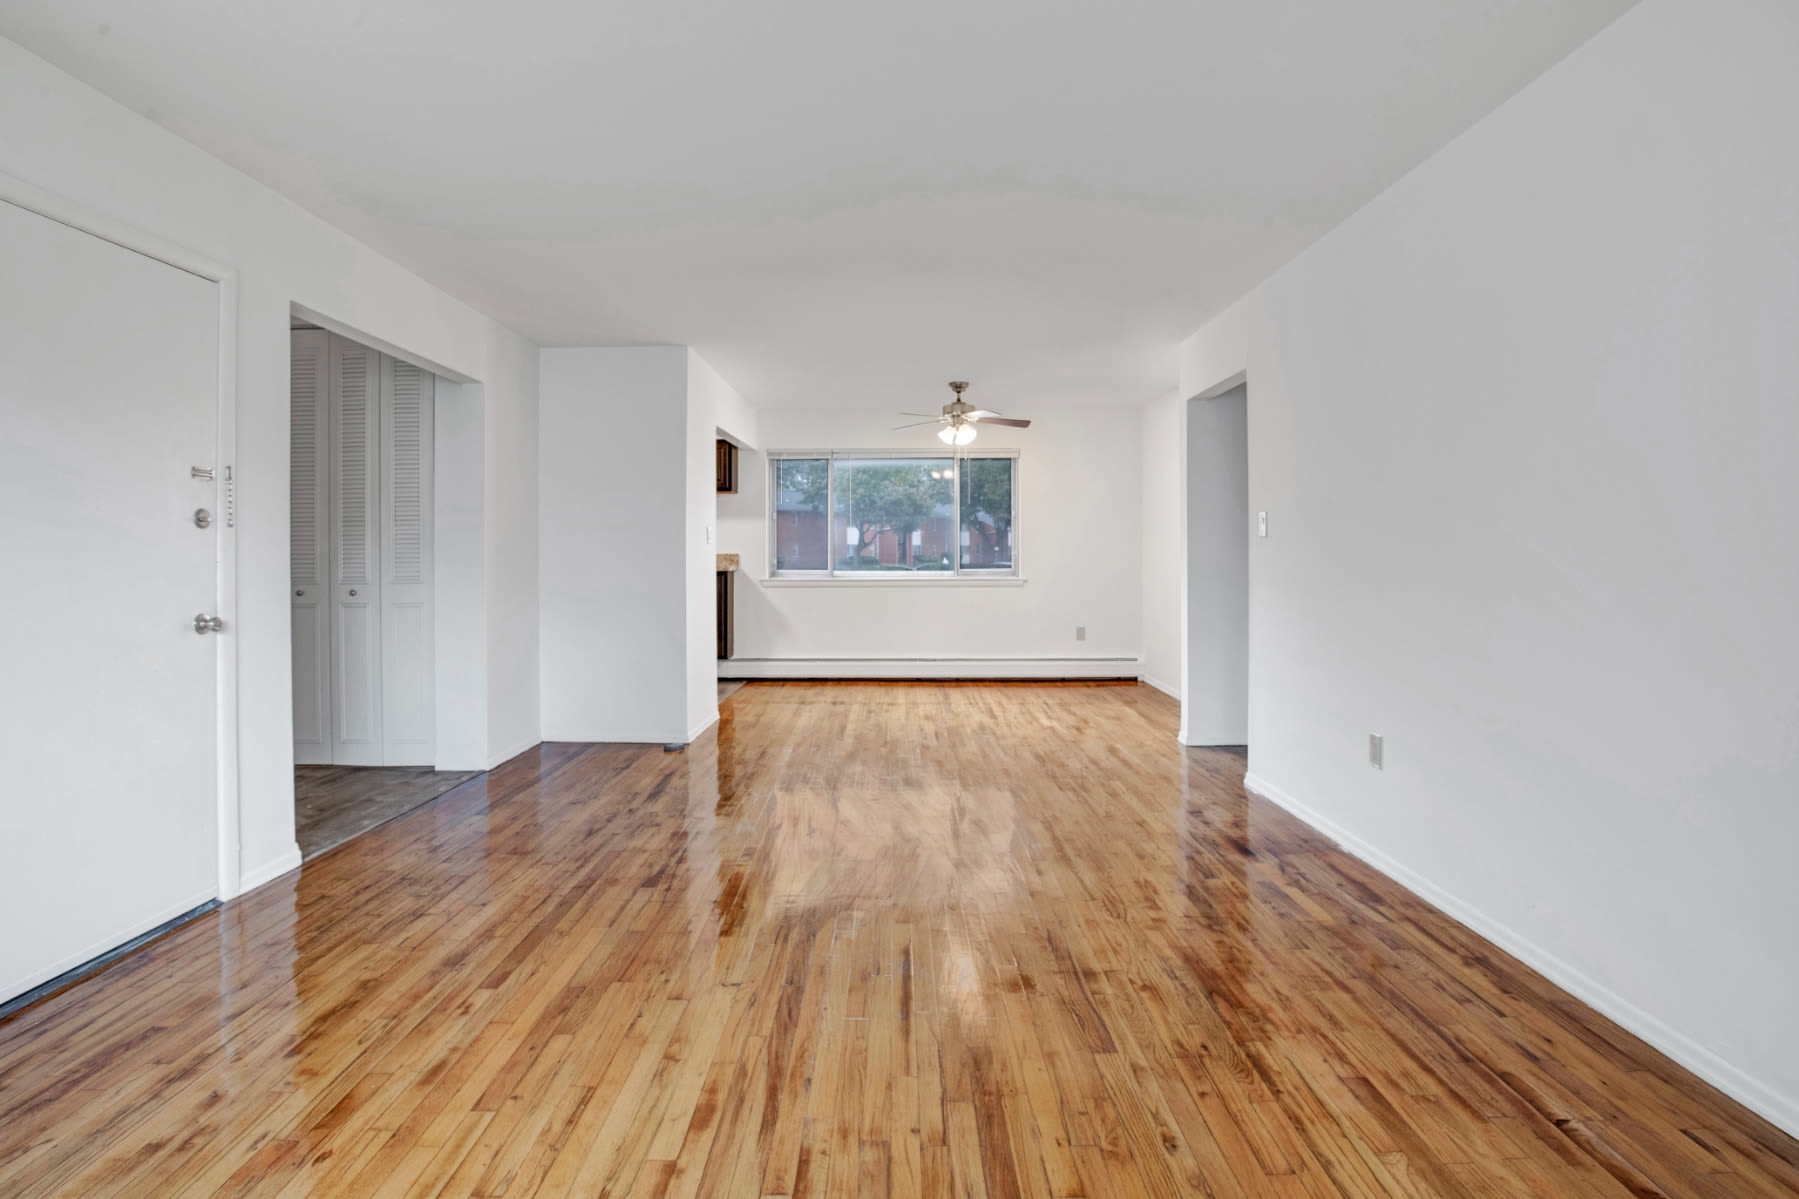 Hardwood flooring with window later in the day at Laurel Run Village in Bordentown, New Jersey